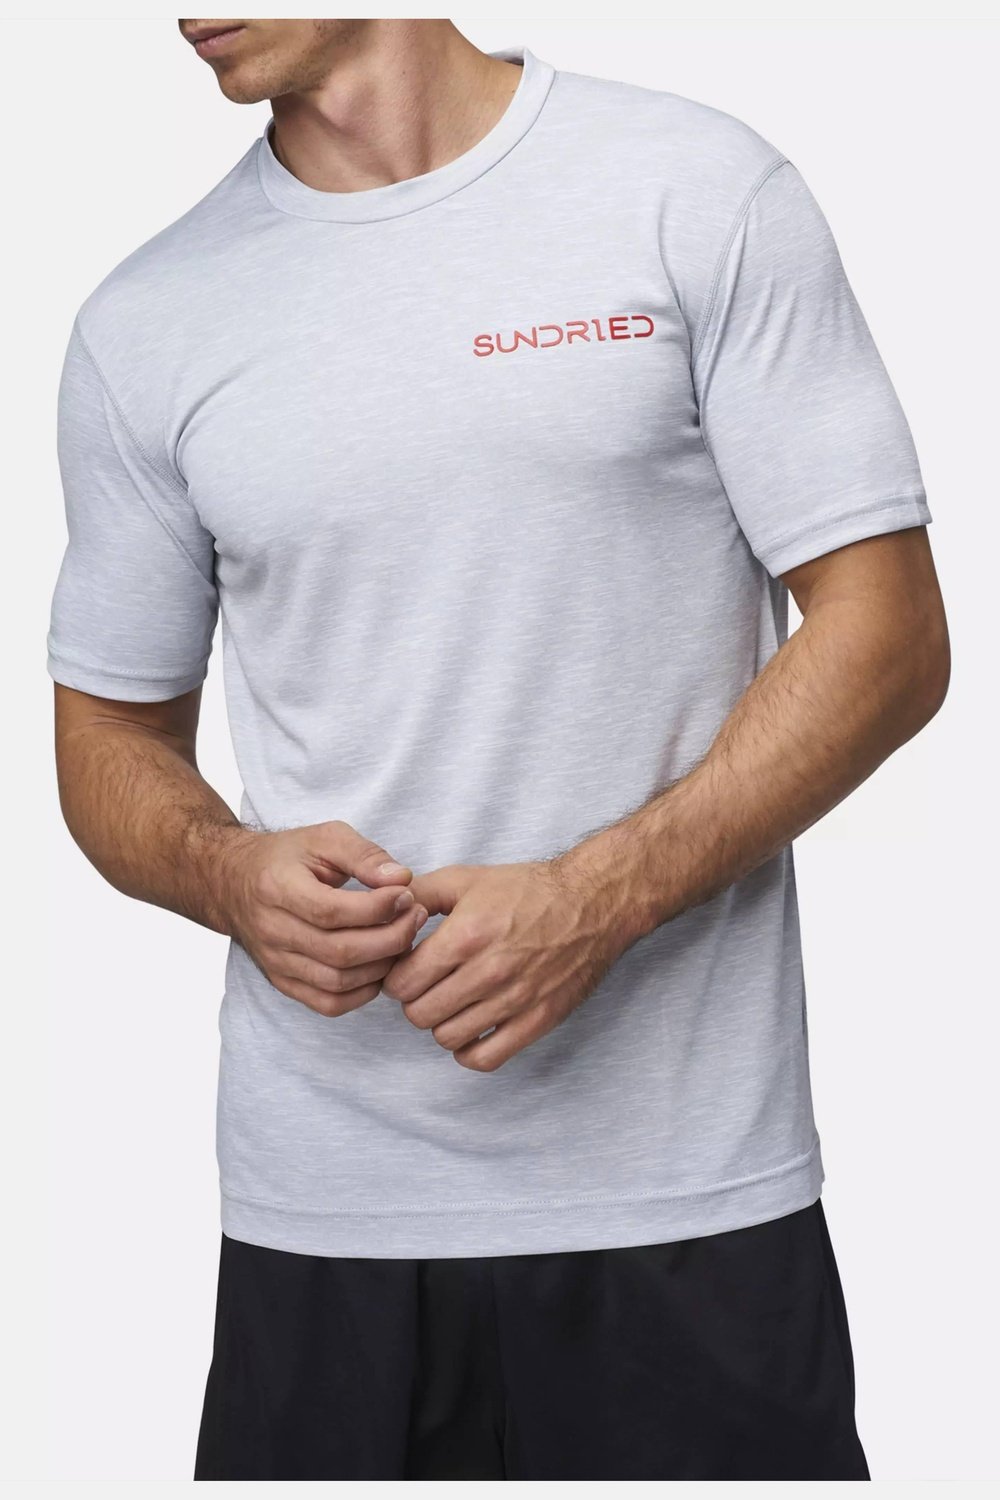 Sundried Olperer Men's Recycled Coffee T-Shirt T-Shirt Activewear